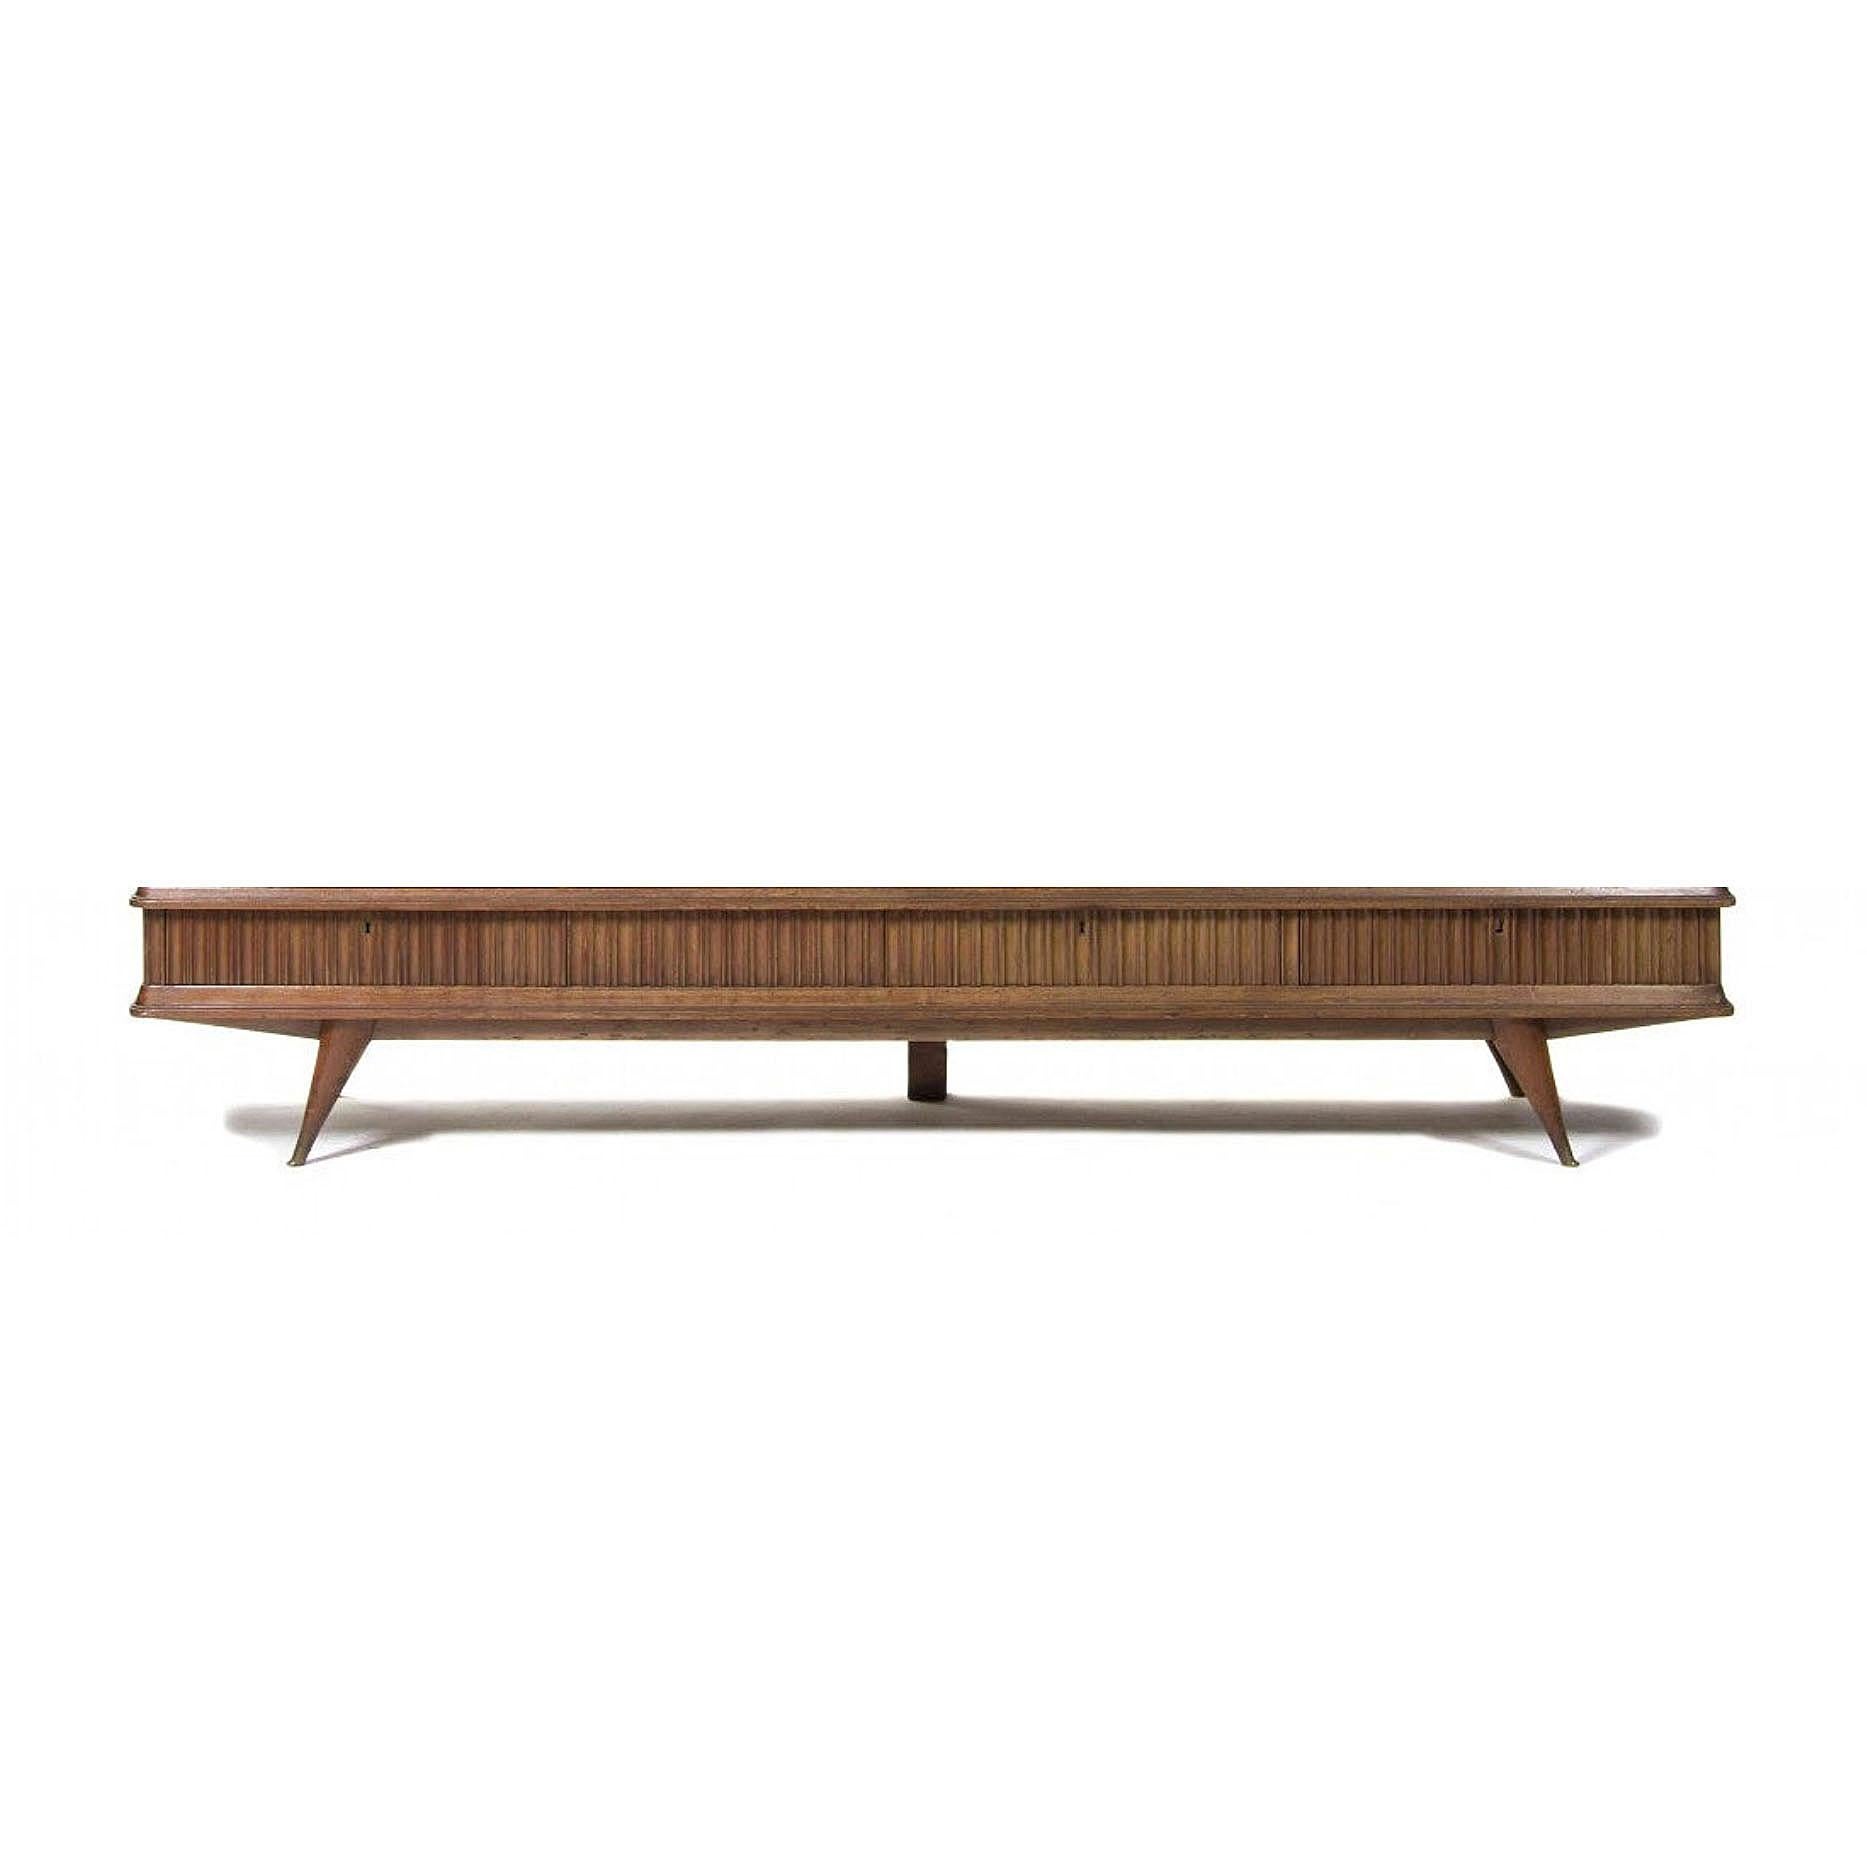 Wood Dramatic 1940s Low Console Platform Bench Media Table by Eugenio Diez